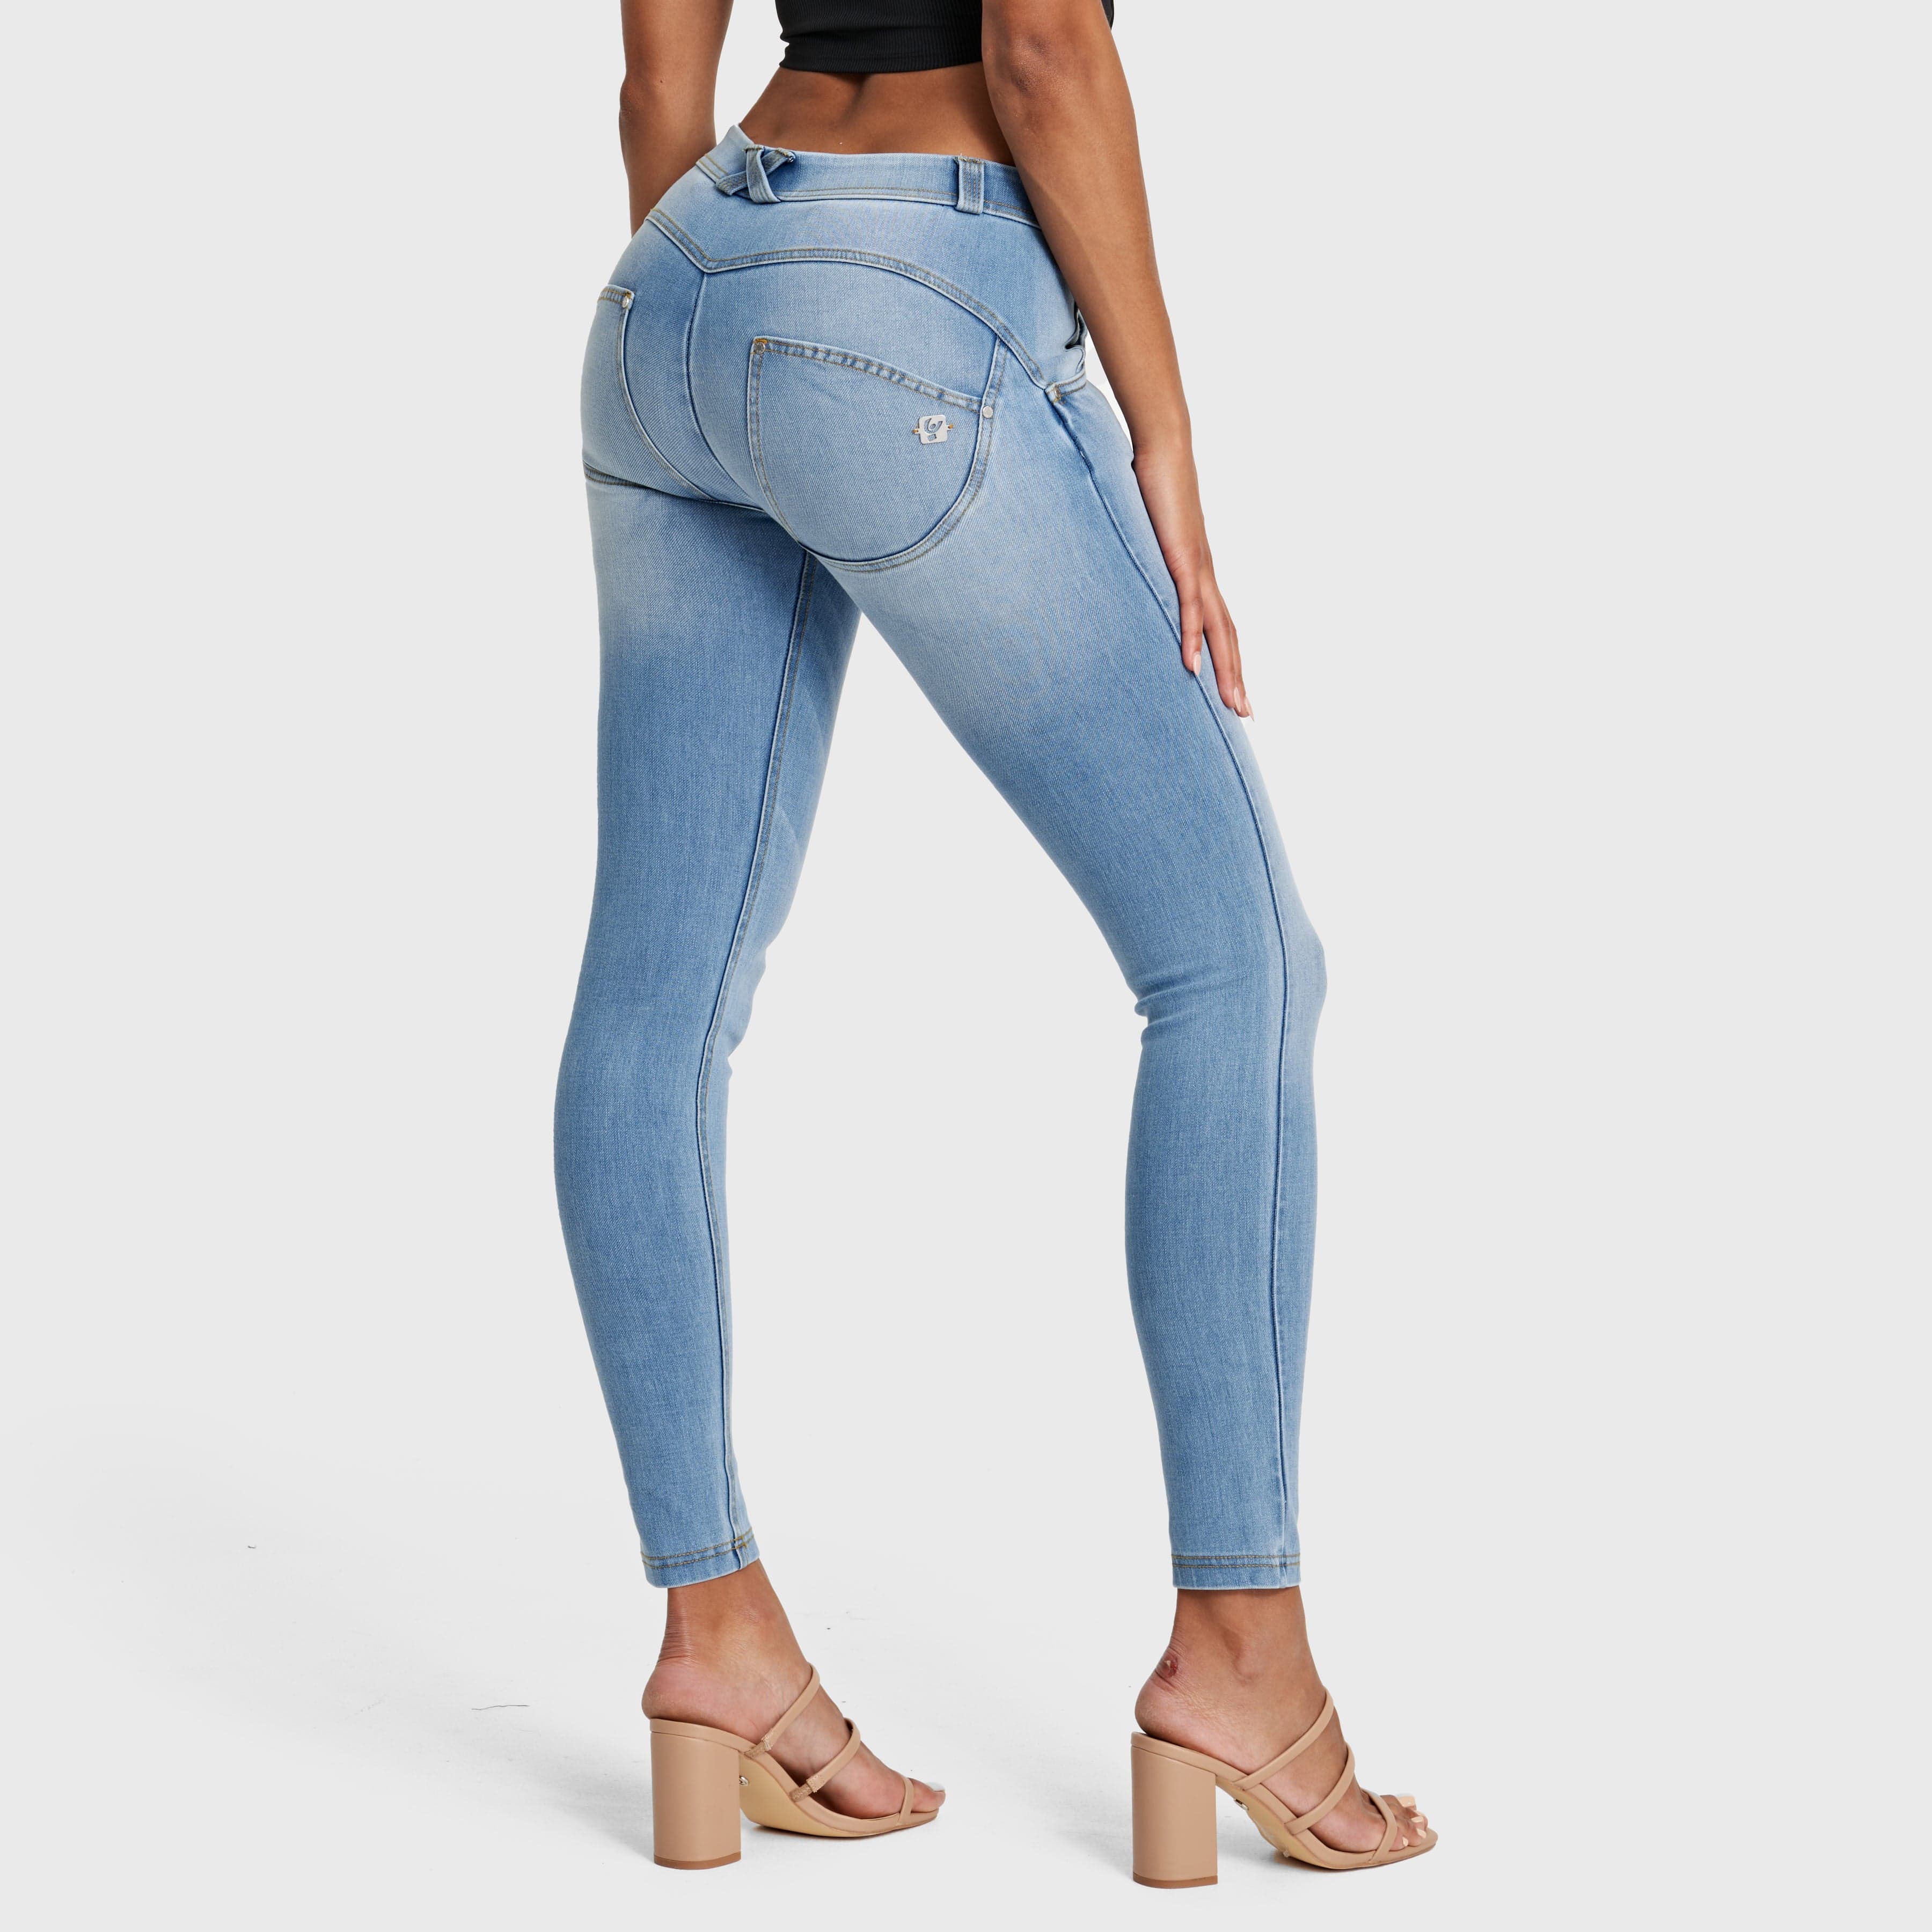 WR.UP® Snug Jeans - Mid Rise - Full Length - Light Blue + Yellow Stitching 1